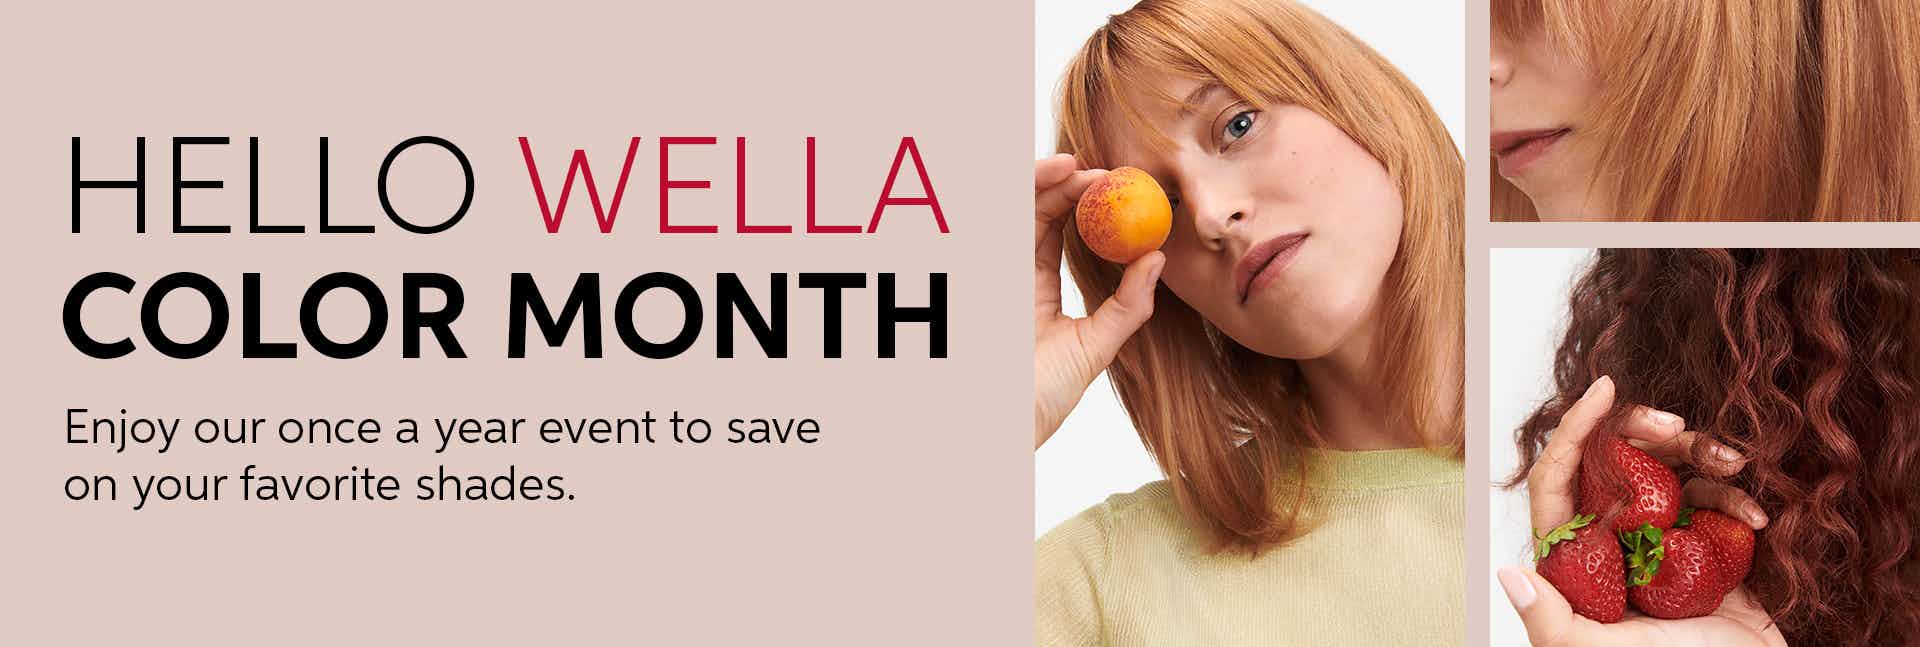 Wella Color Month: Enjoy our once a year event to save on your favorites shades